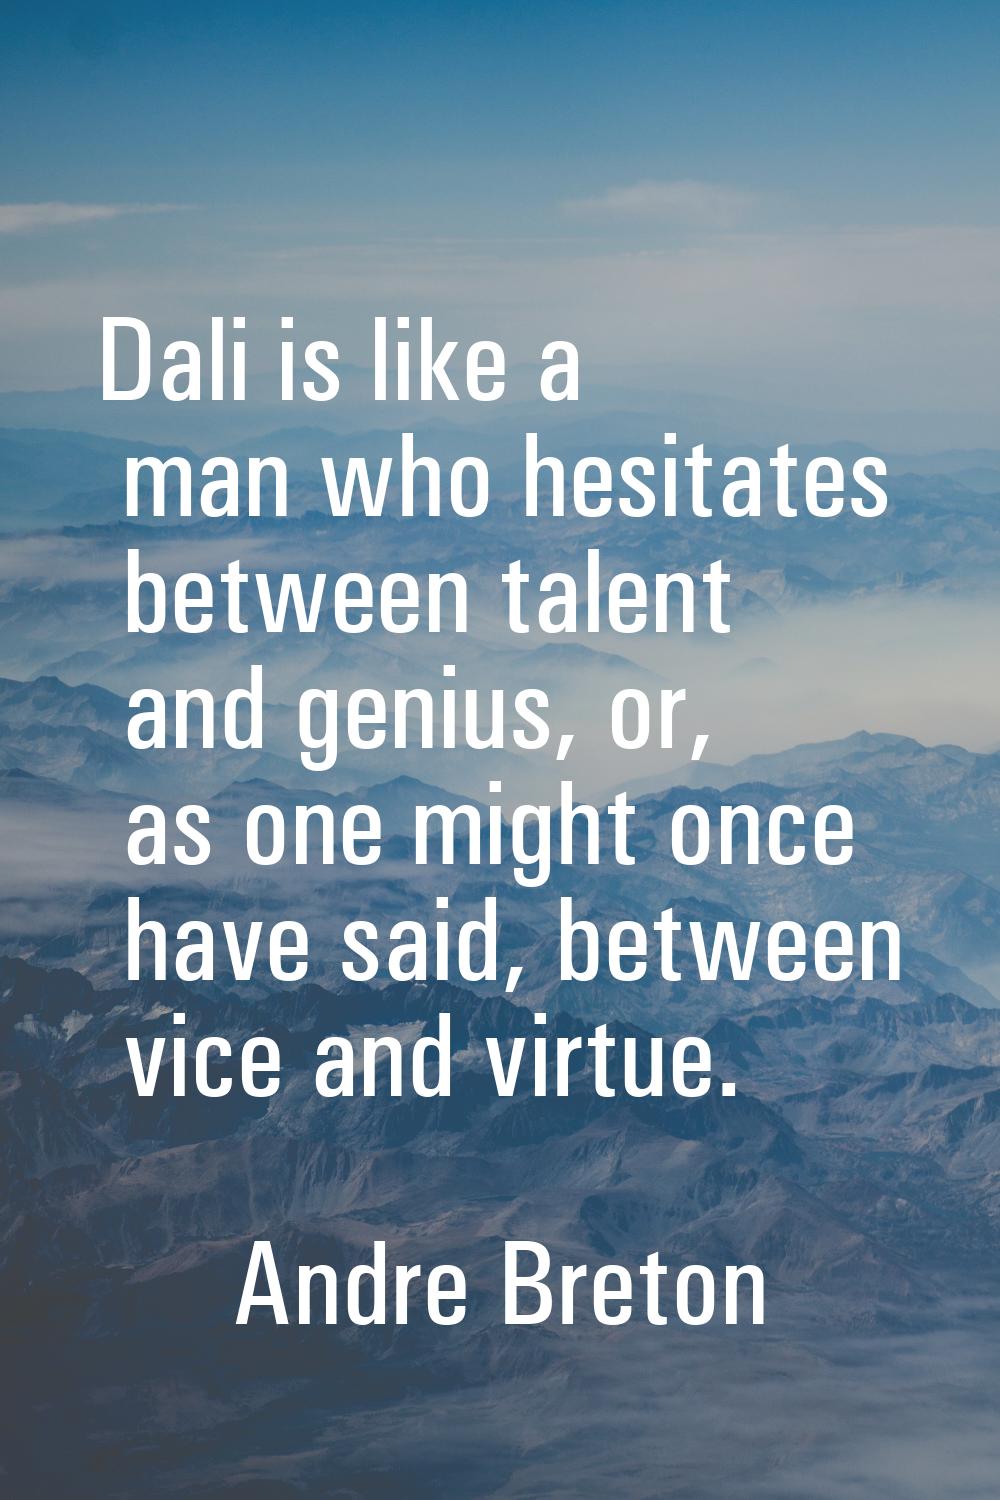 Dali is like a man who hesitates between talent and genius, or, as one might once have said, betwee